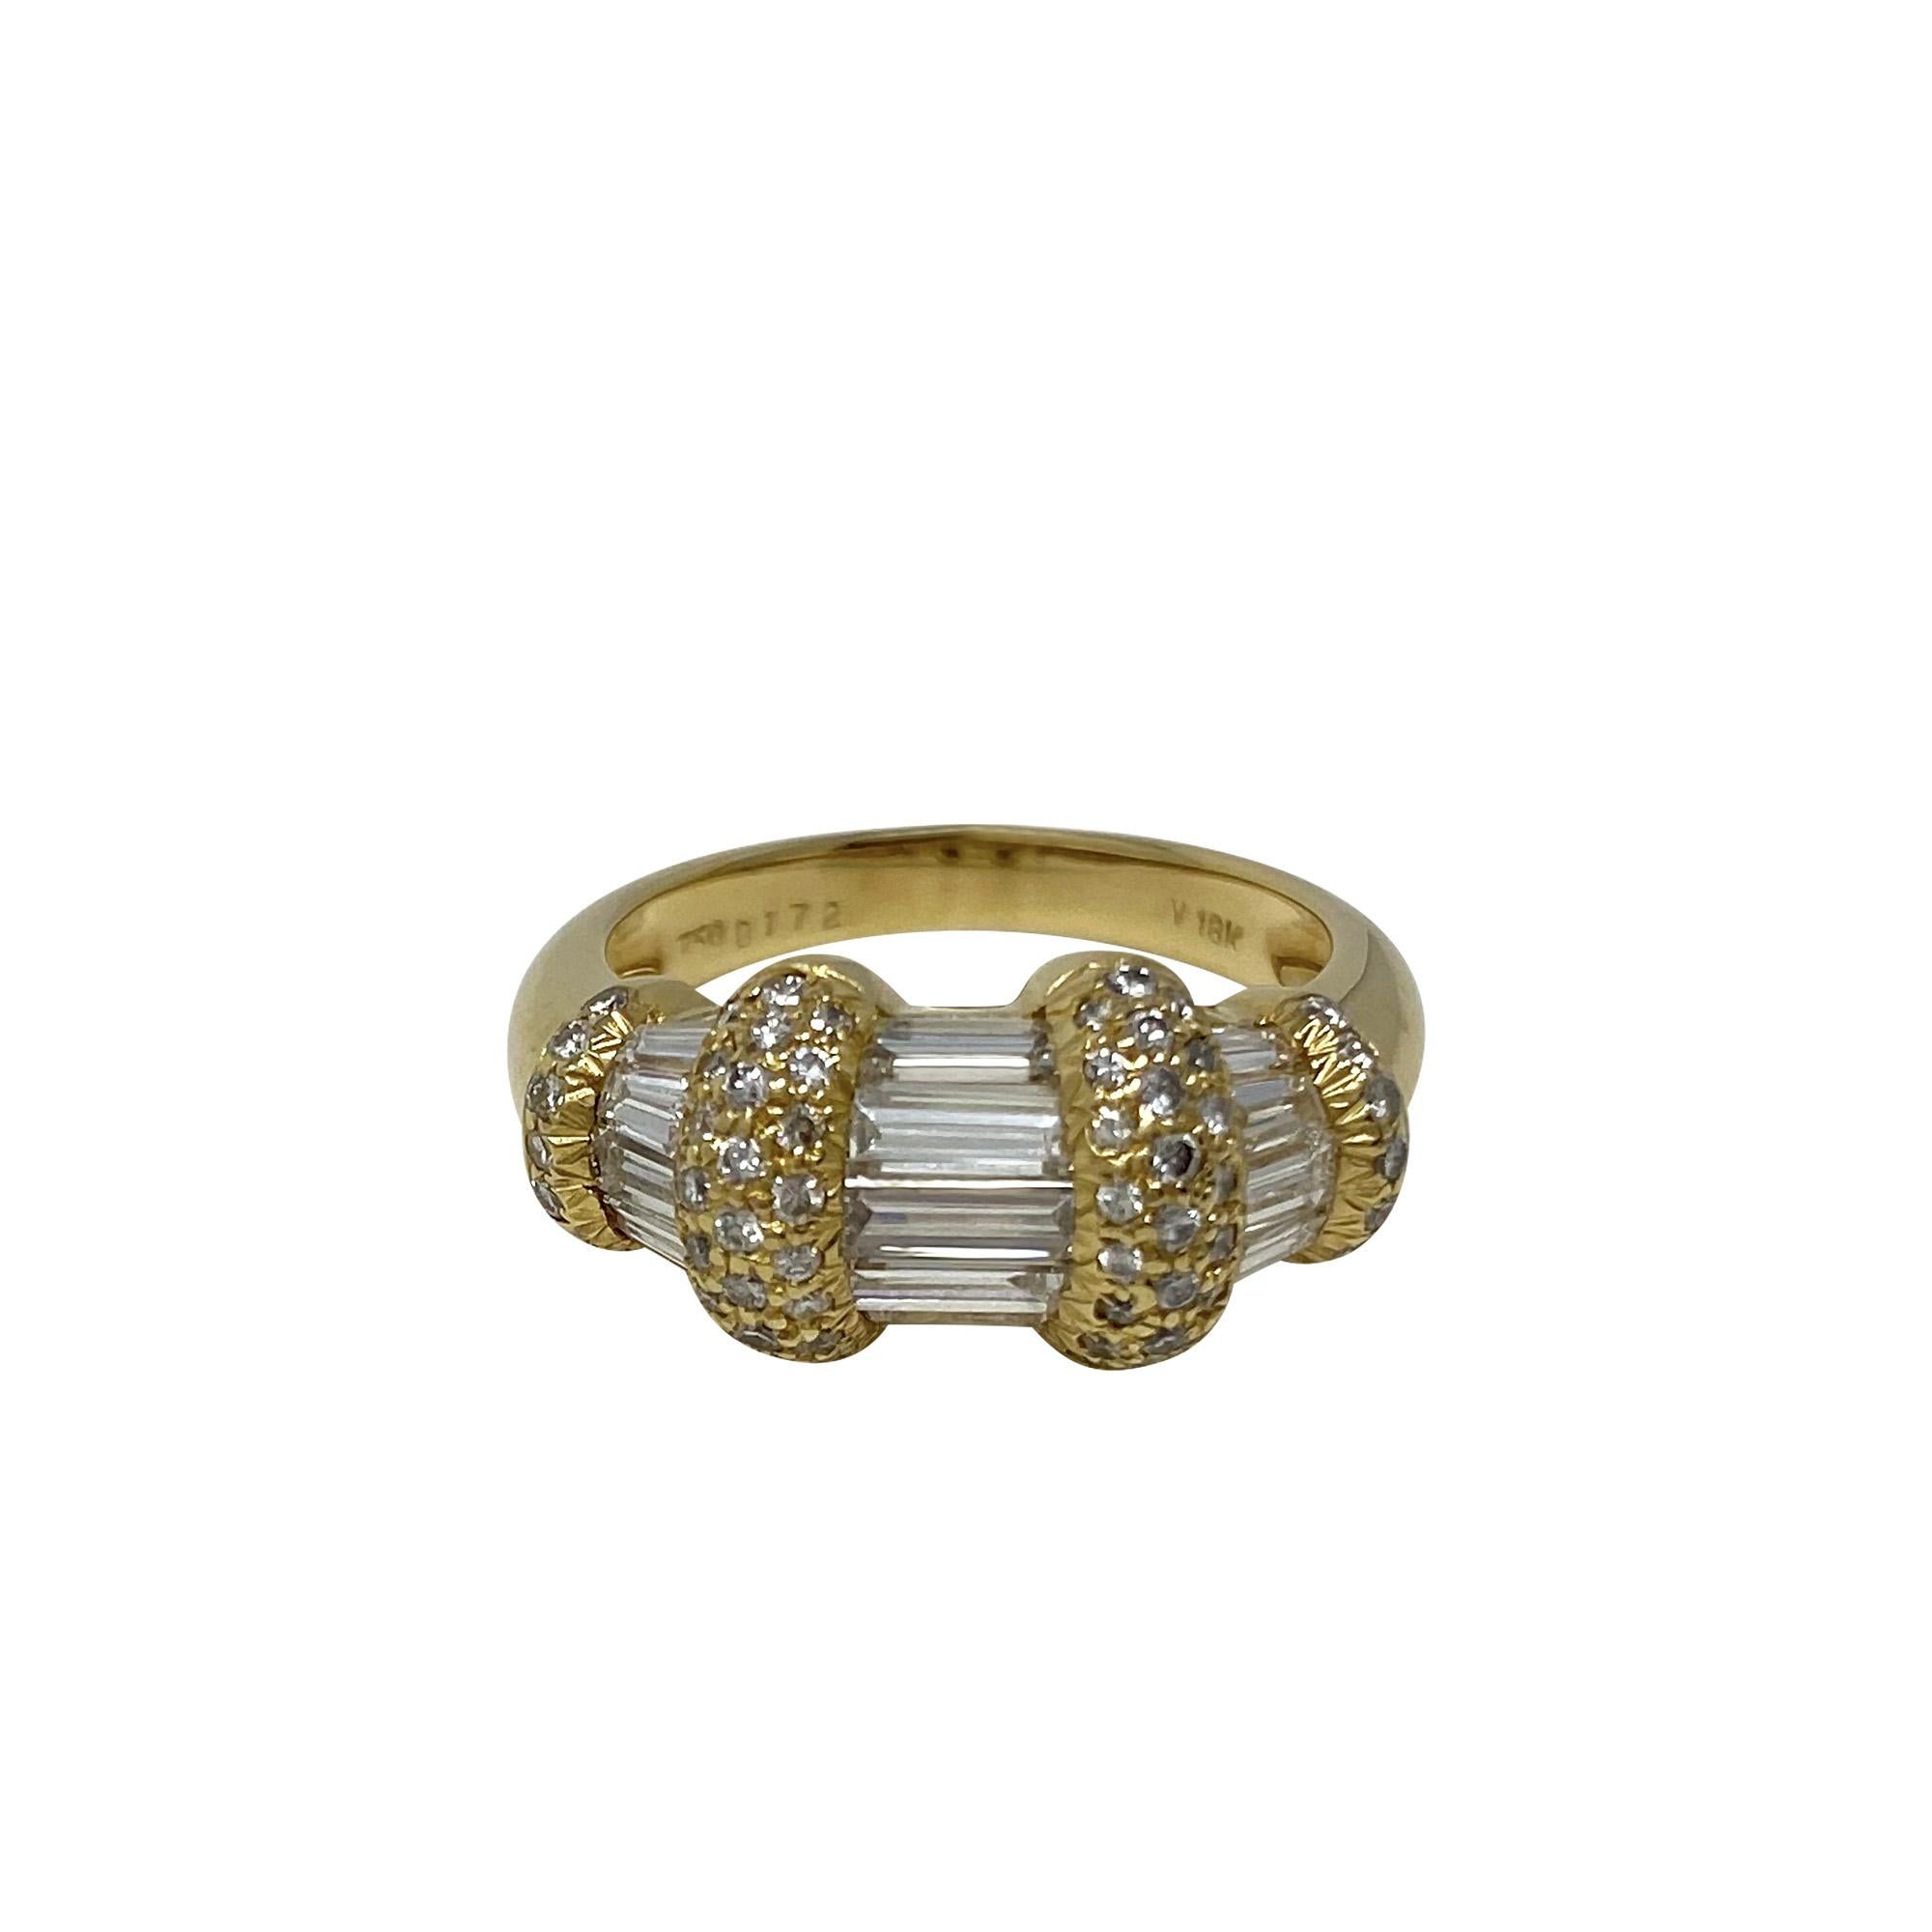 Such a beauty - for either hand!  This 18 karat yellow gold ring supports 1.72 cts of baguette and round diamonds and is a size 6 1/2. Buy this sparkler for yourself!  What a treat!